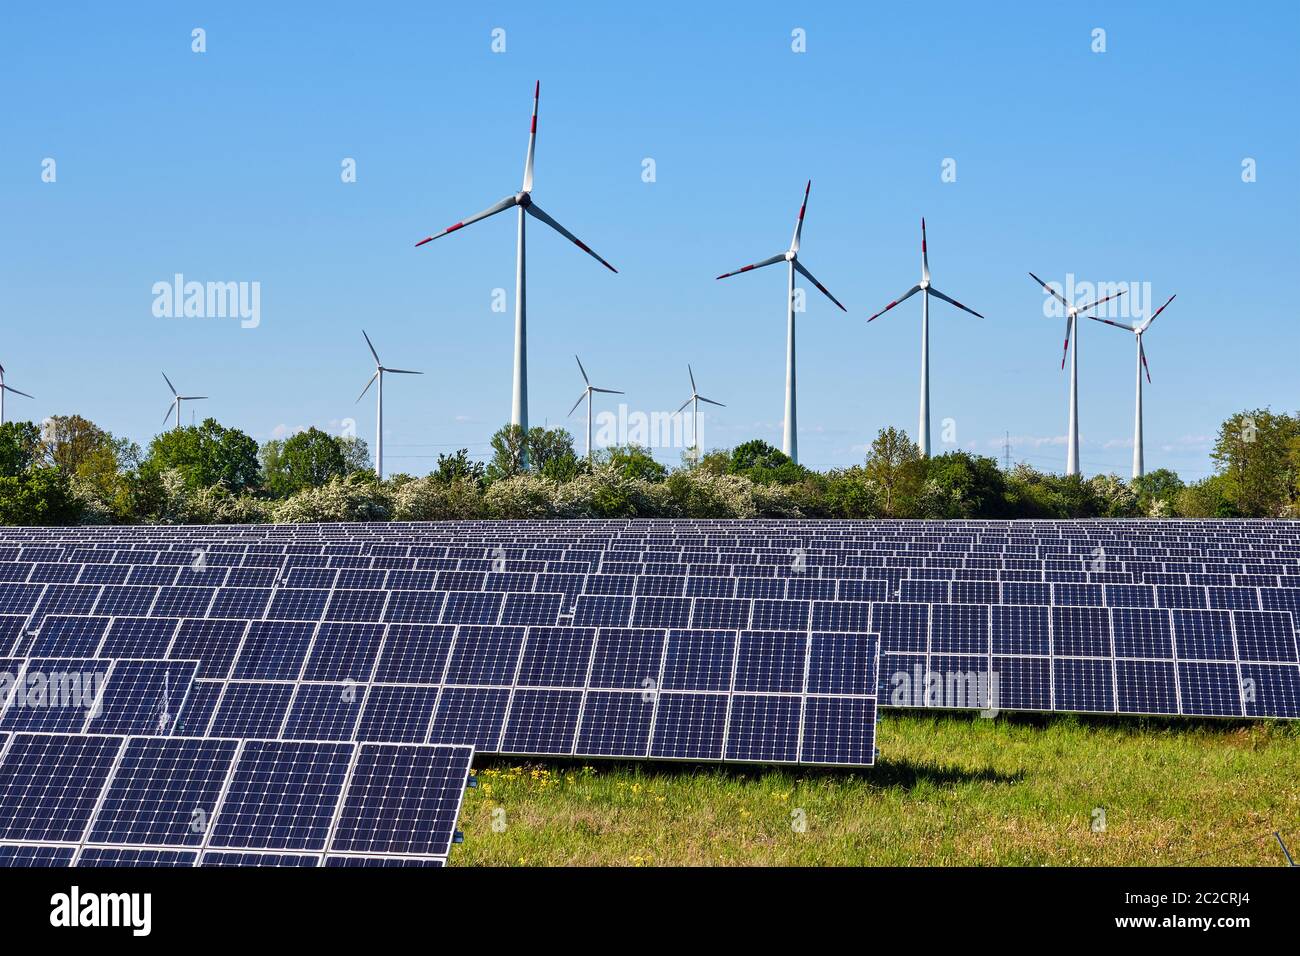 Solar panels and  wind power plants seen in Germany Stock Photo